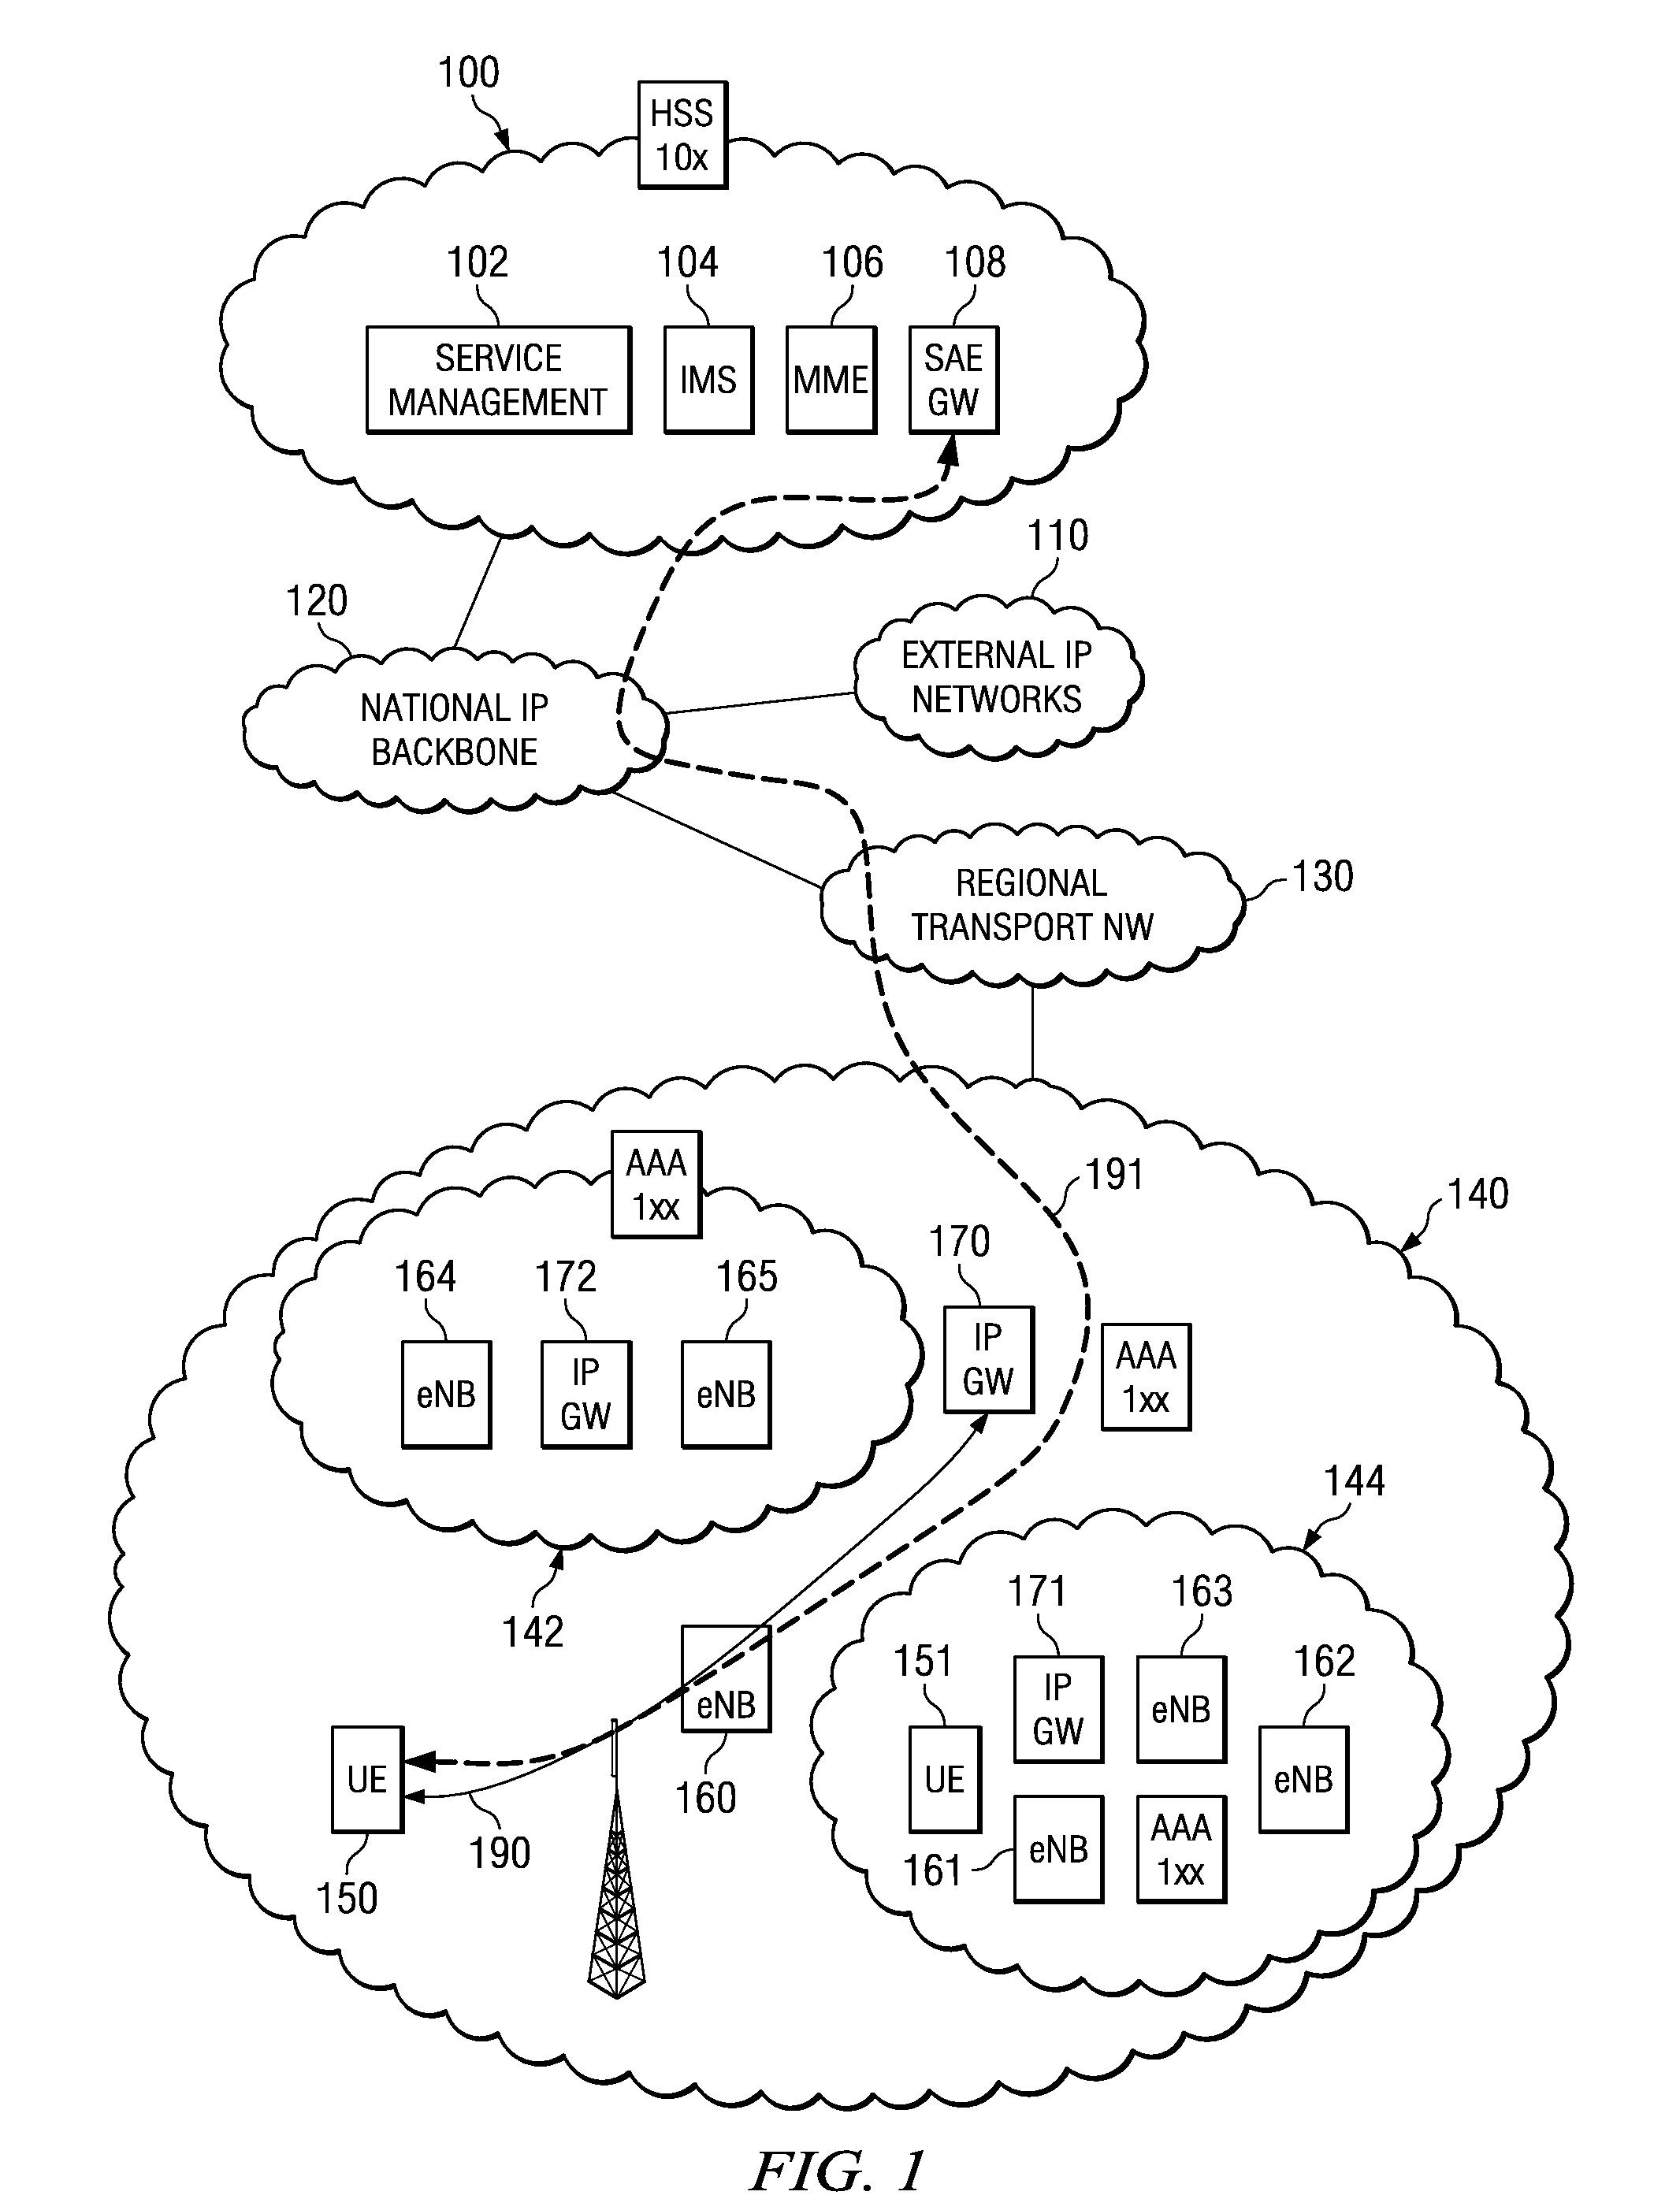 System and Method for Providing Local IP Breakout Services Employing Access Point Names